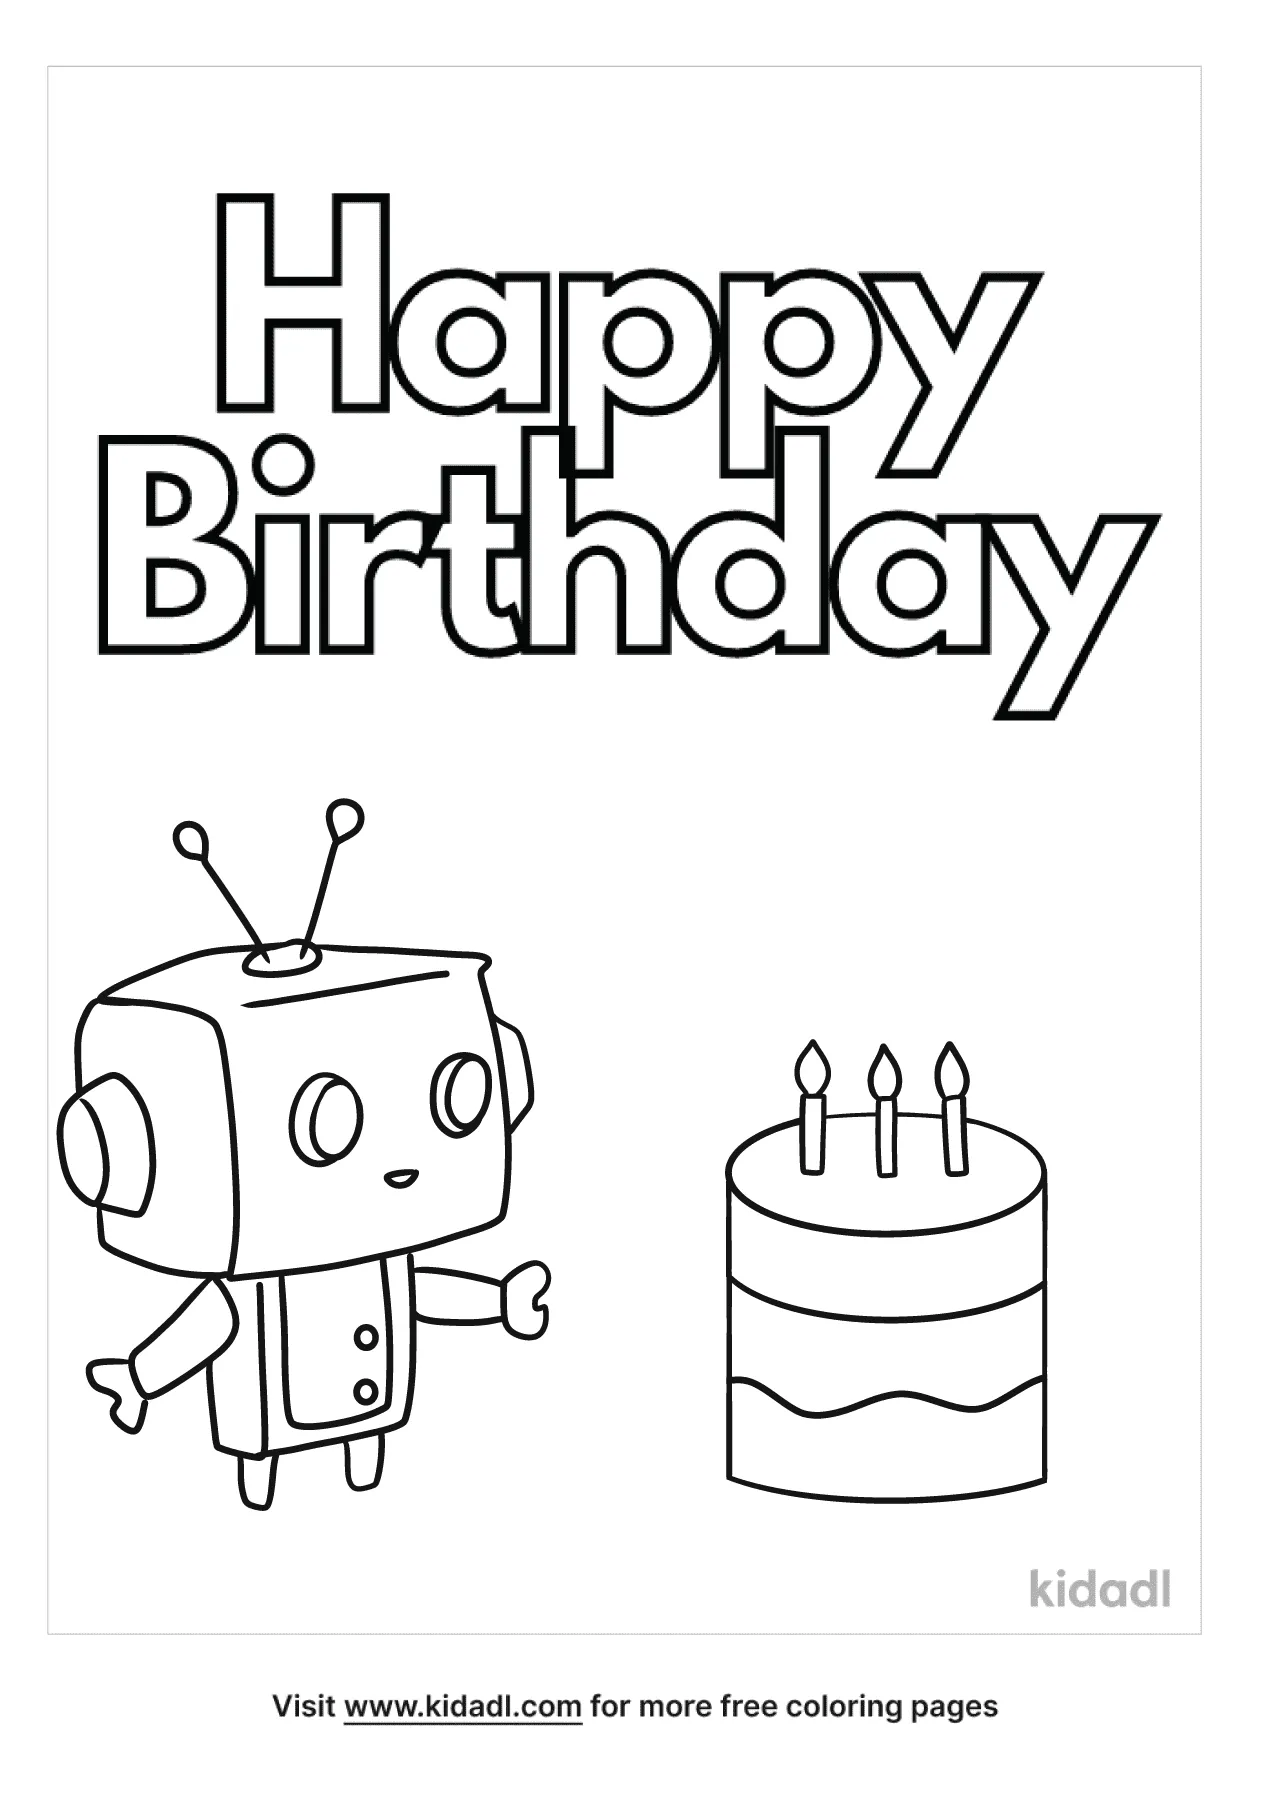 Happy Birthday Robot Coloring Page | Free Birthday Coloring Page | Kidadl